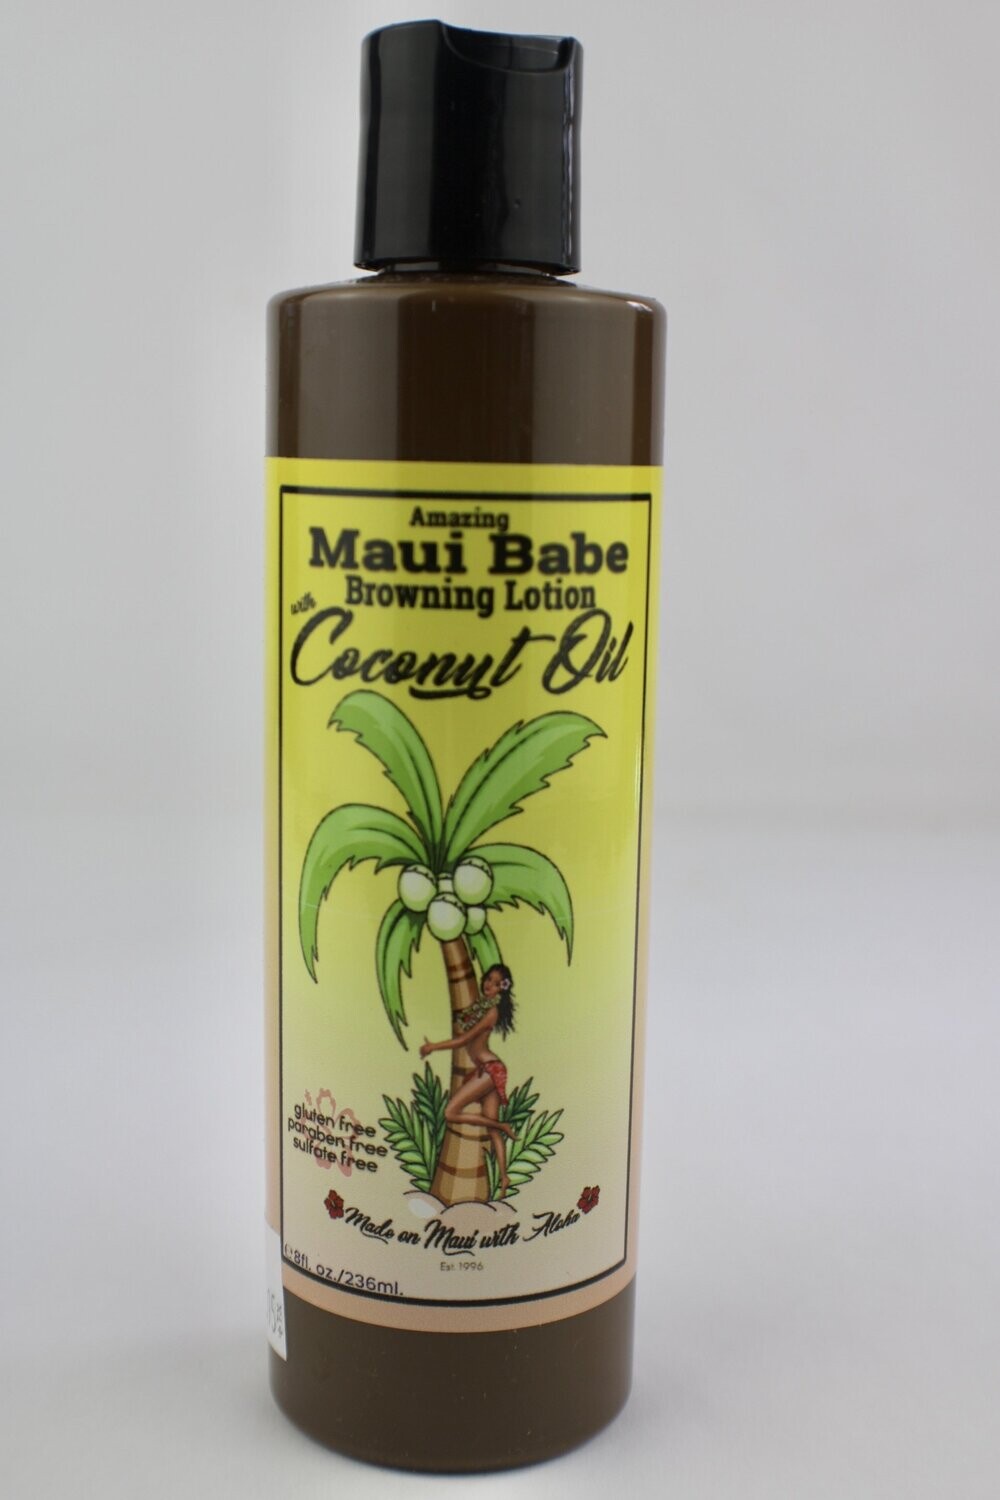 Maui Babe Browning Lotion with Coconut Oil - 8oz (236 ml)